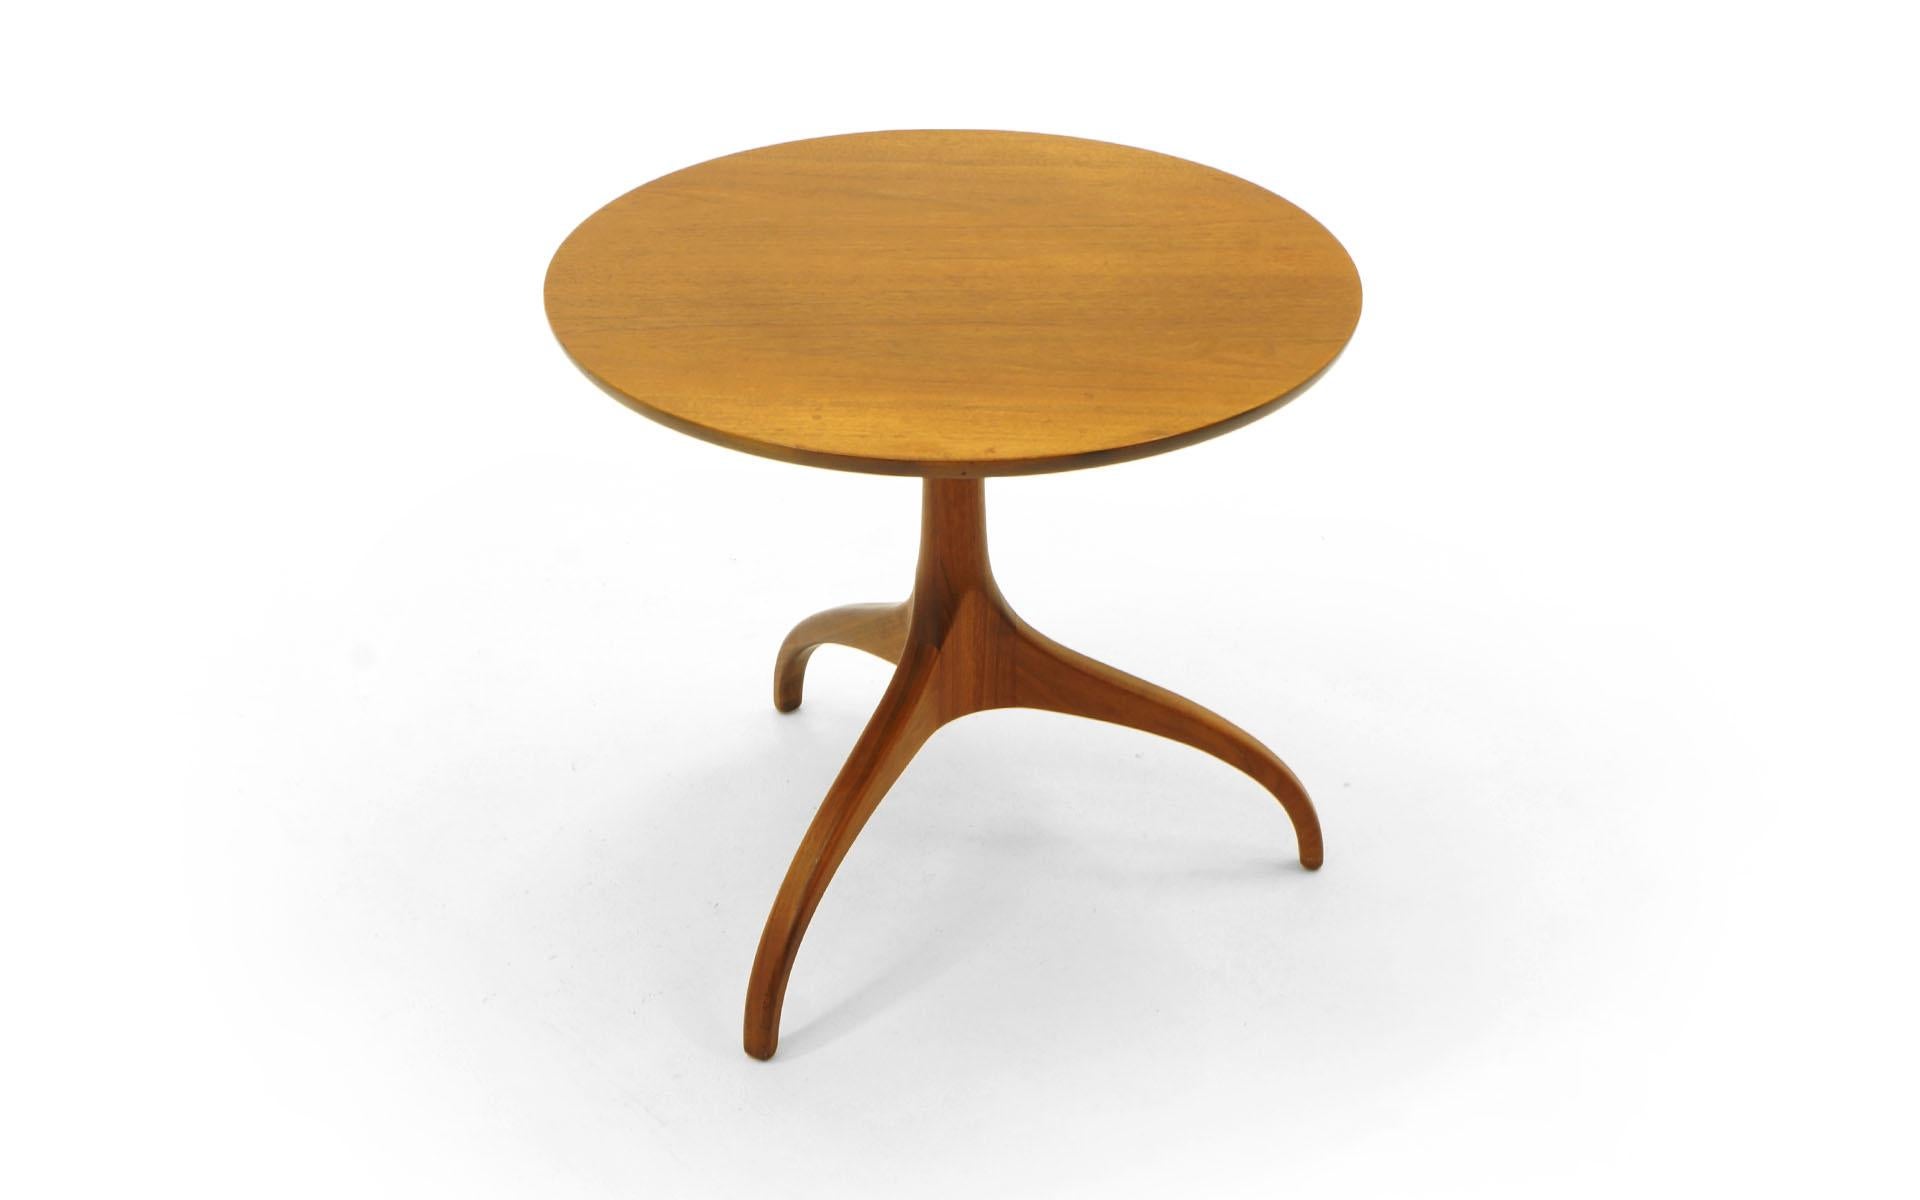 Sculptural round end / occasional table by Henredon, 1950s. Excellent condition. Retains original label from Colby and Son's Furniture Store, Chicago.